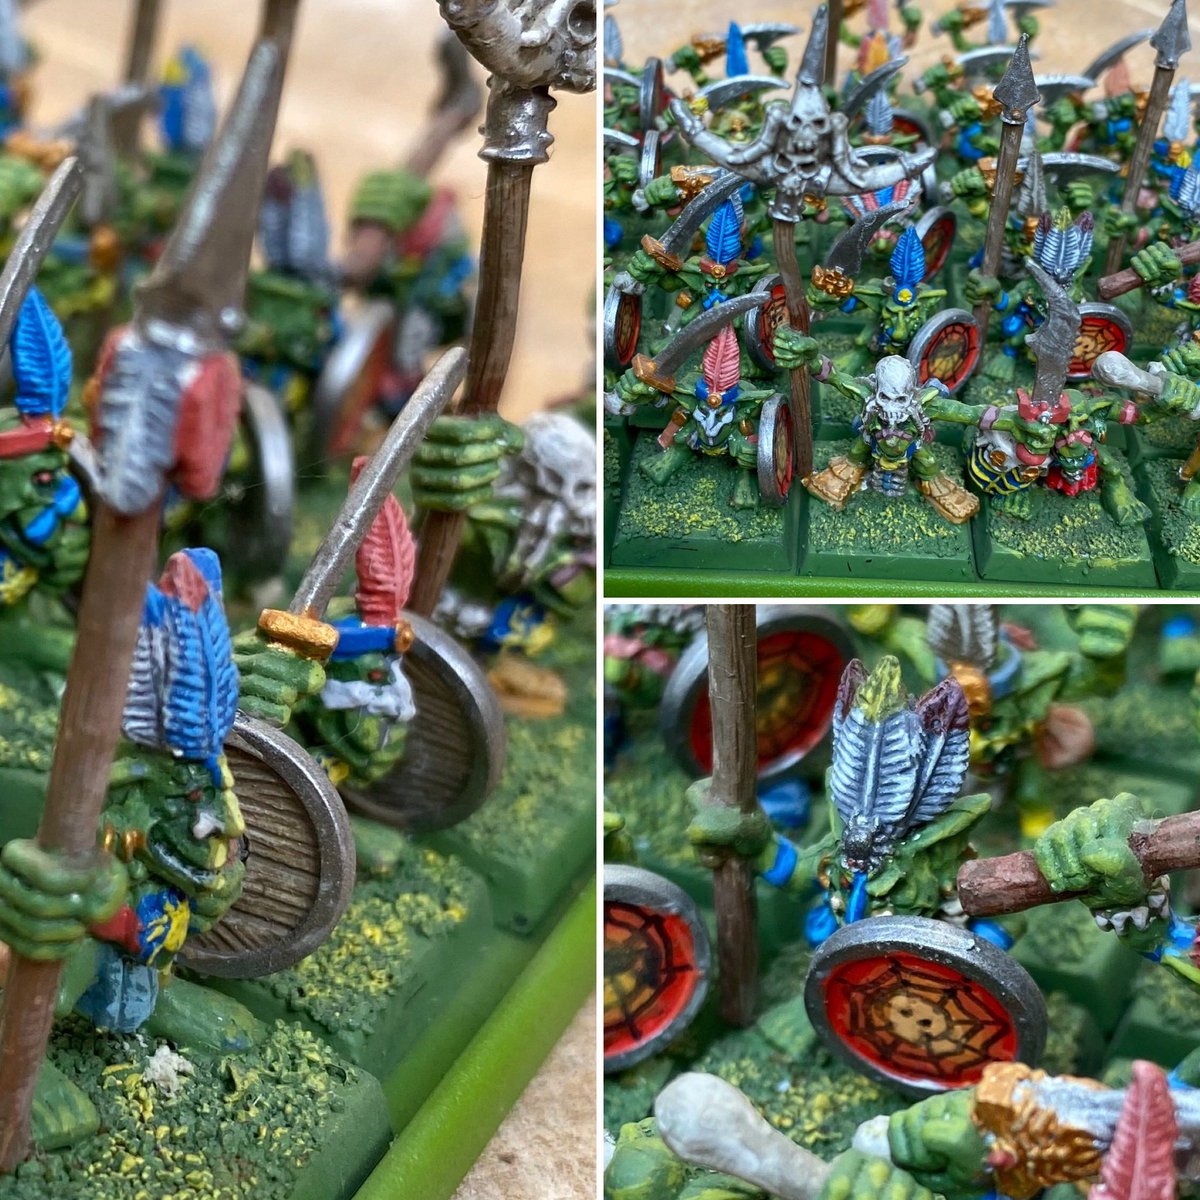 Forest Goblins…so characterful…just wish I had the spider-riding variant as well…
#warhammer #WarhammerCommunity #OldWorld